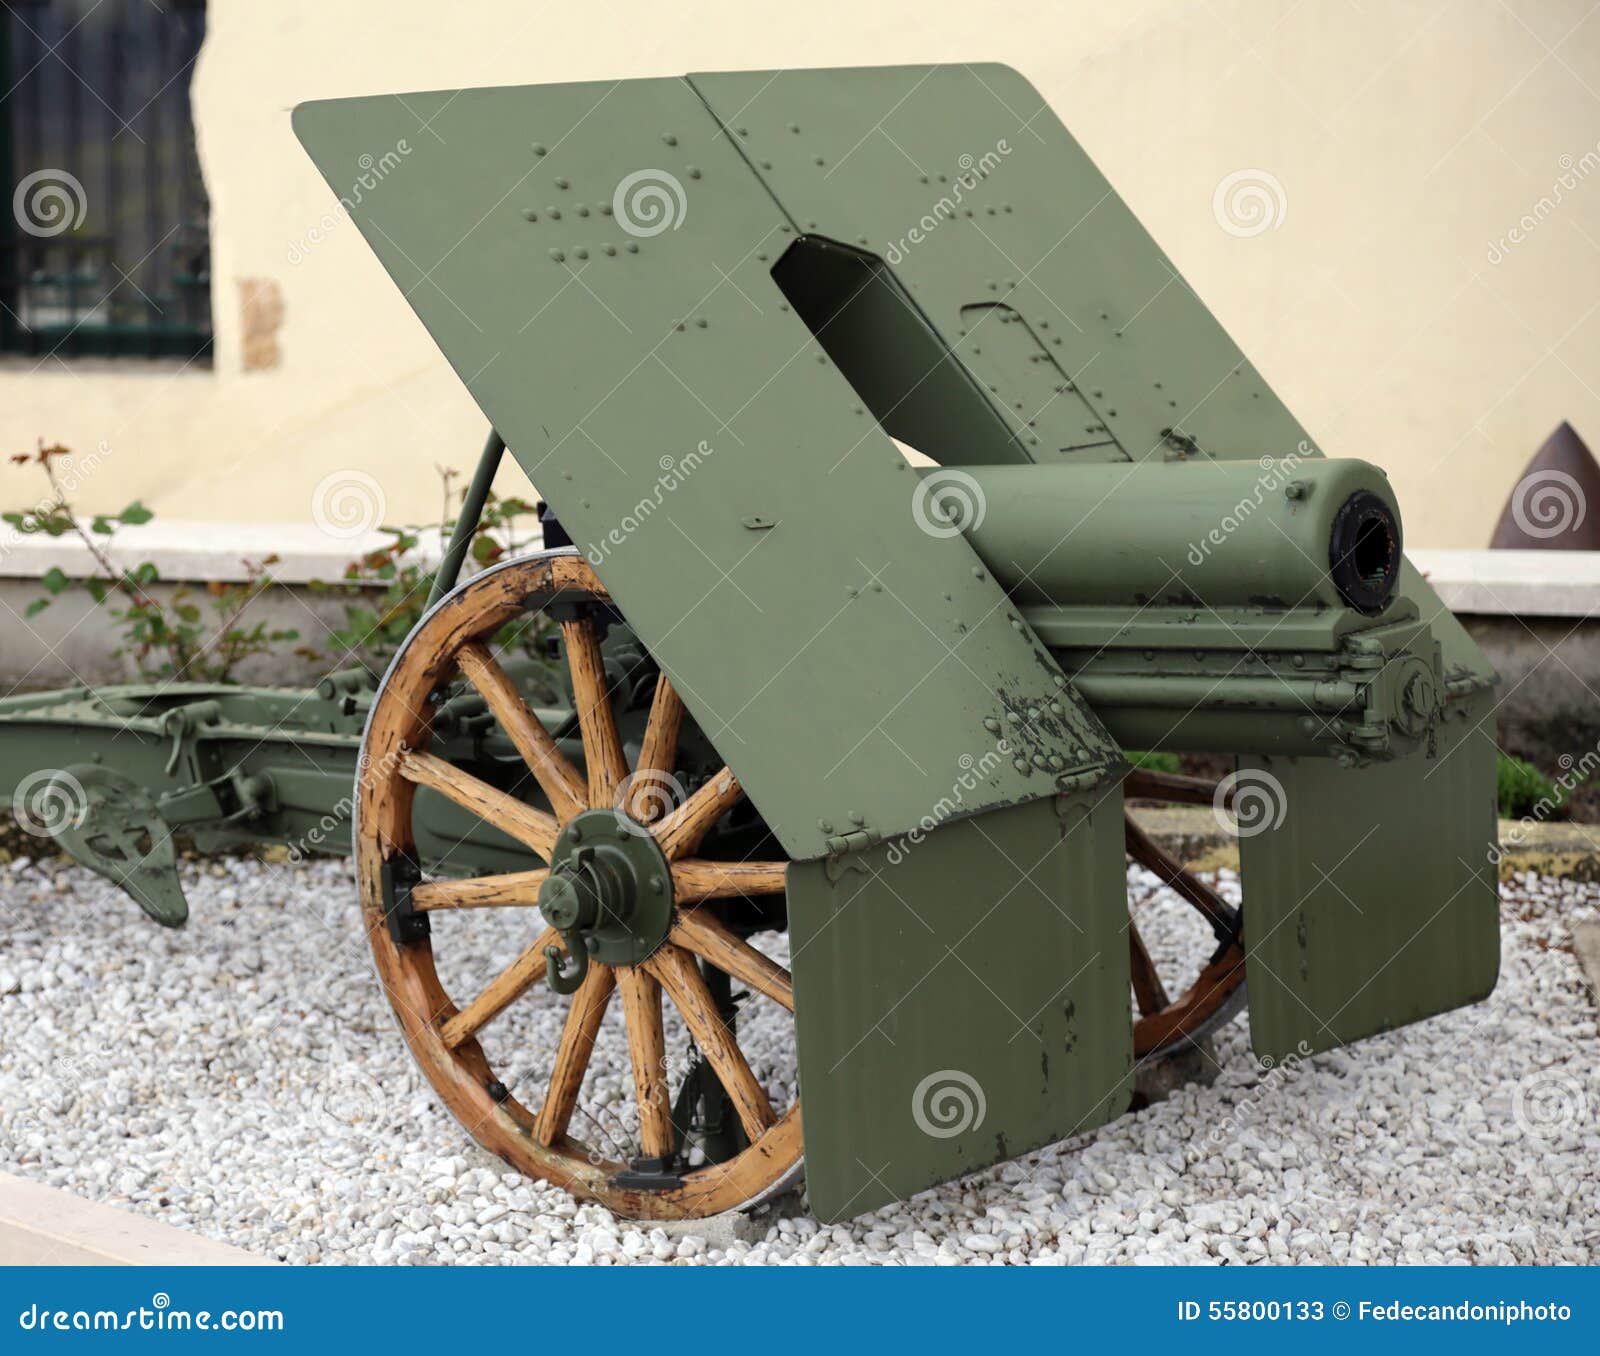 ancient cannon of the world war i in italy